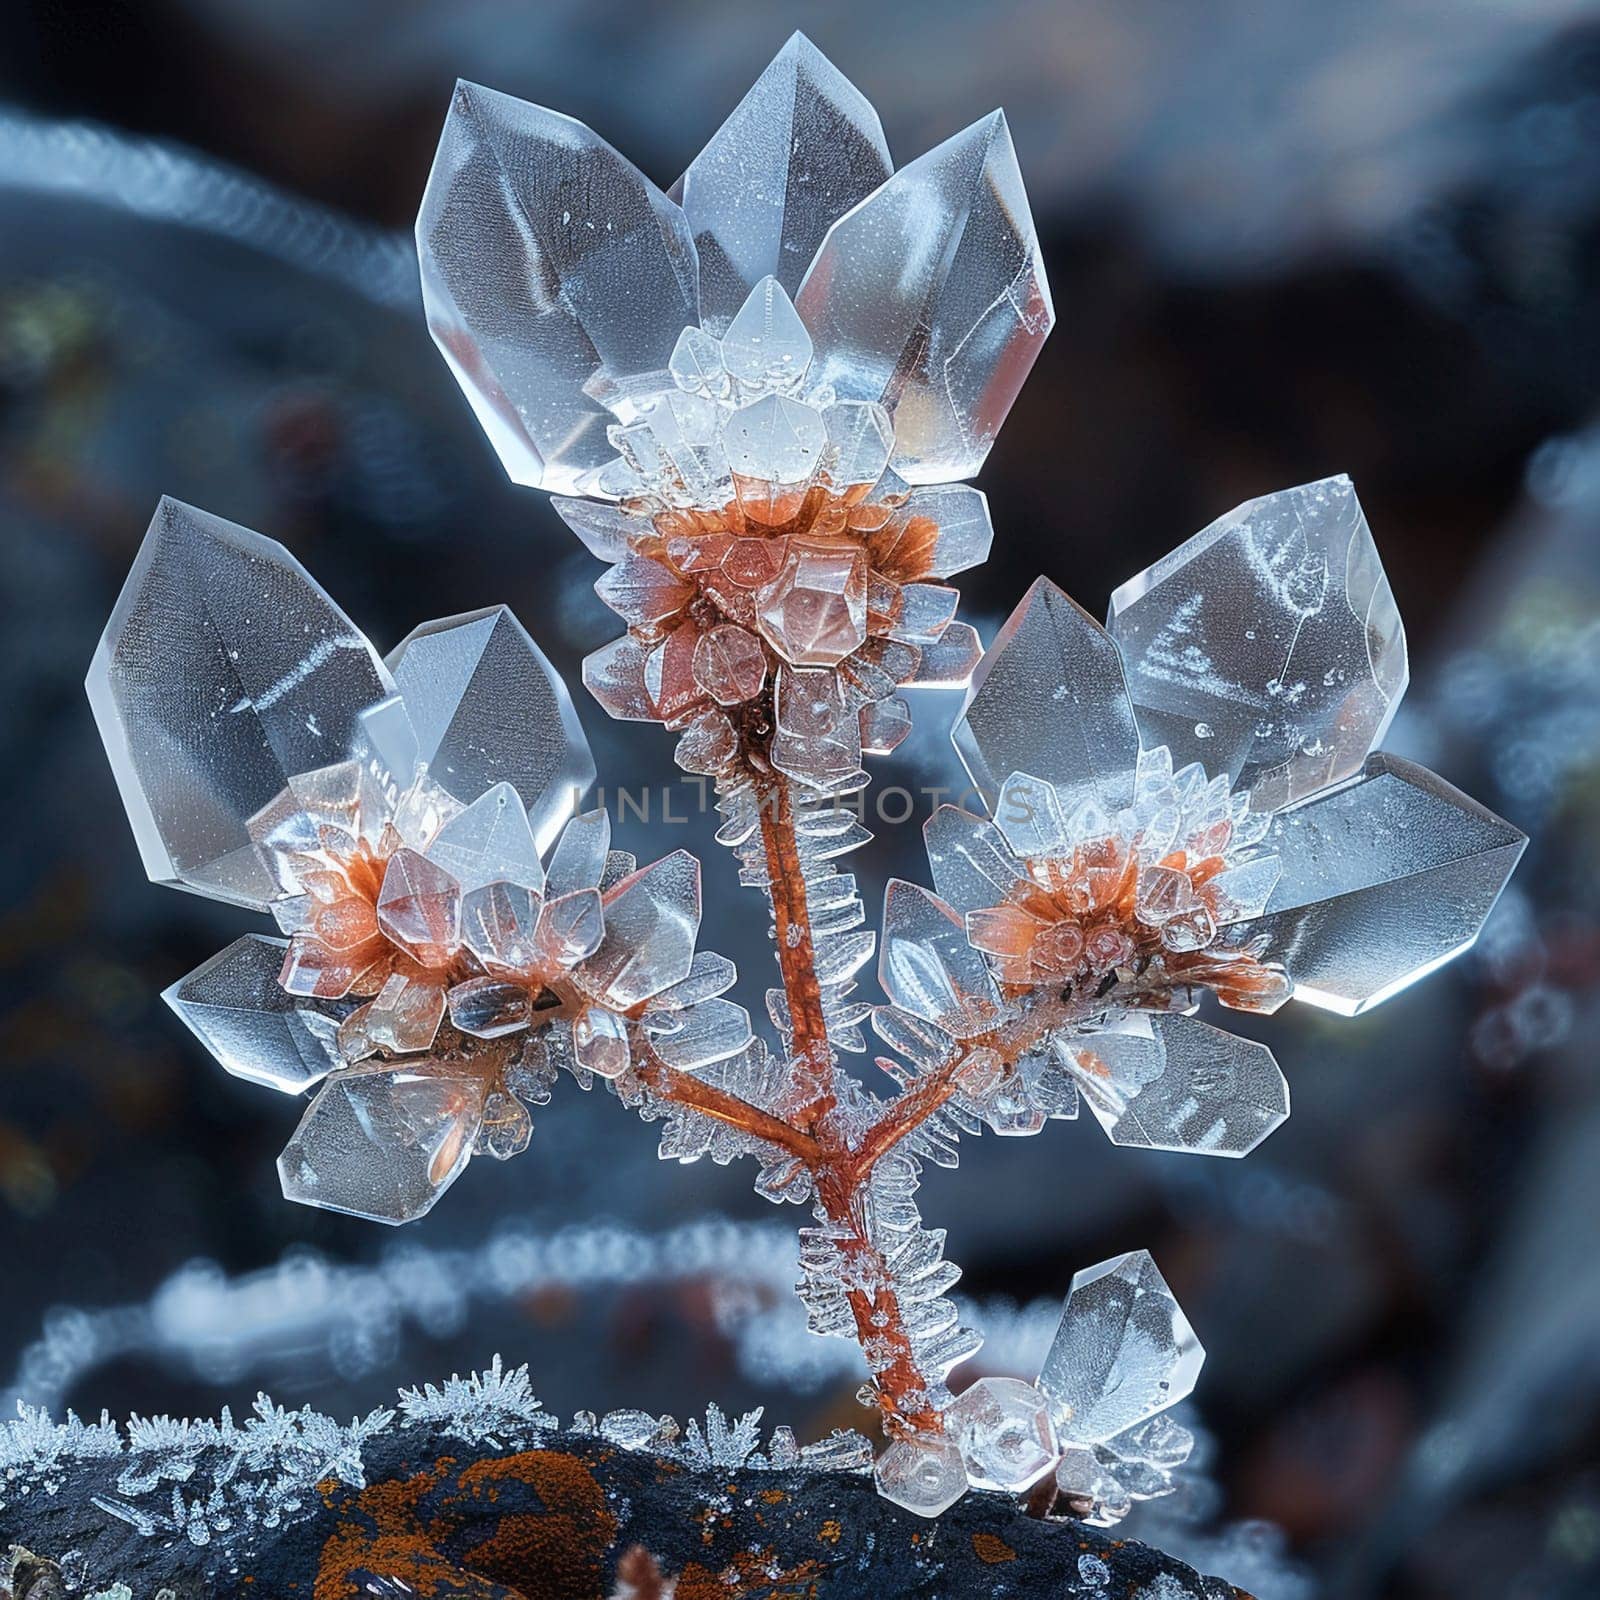 Macro photography of ice crystals, highlighting natural geometry and winter beauty.